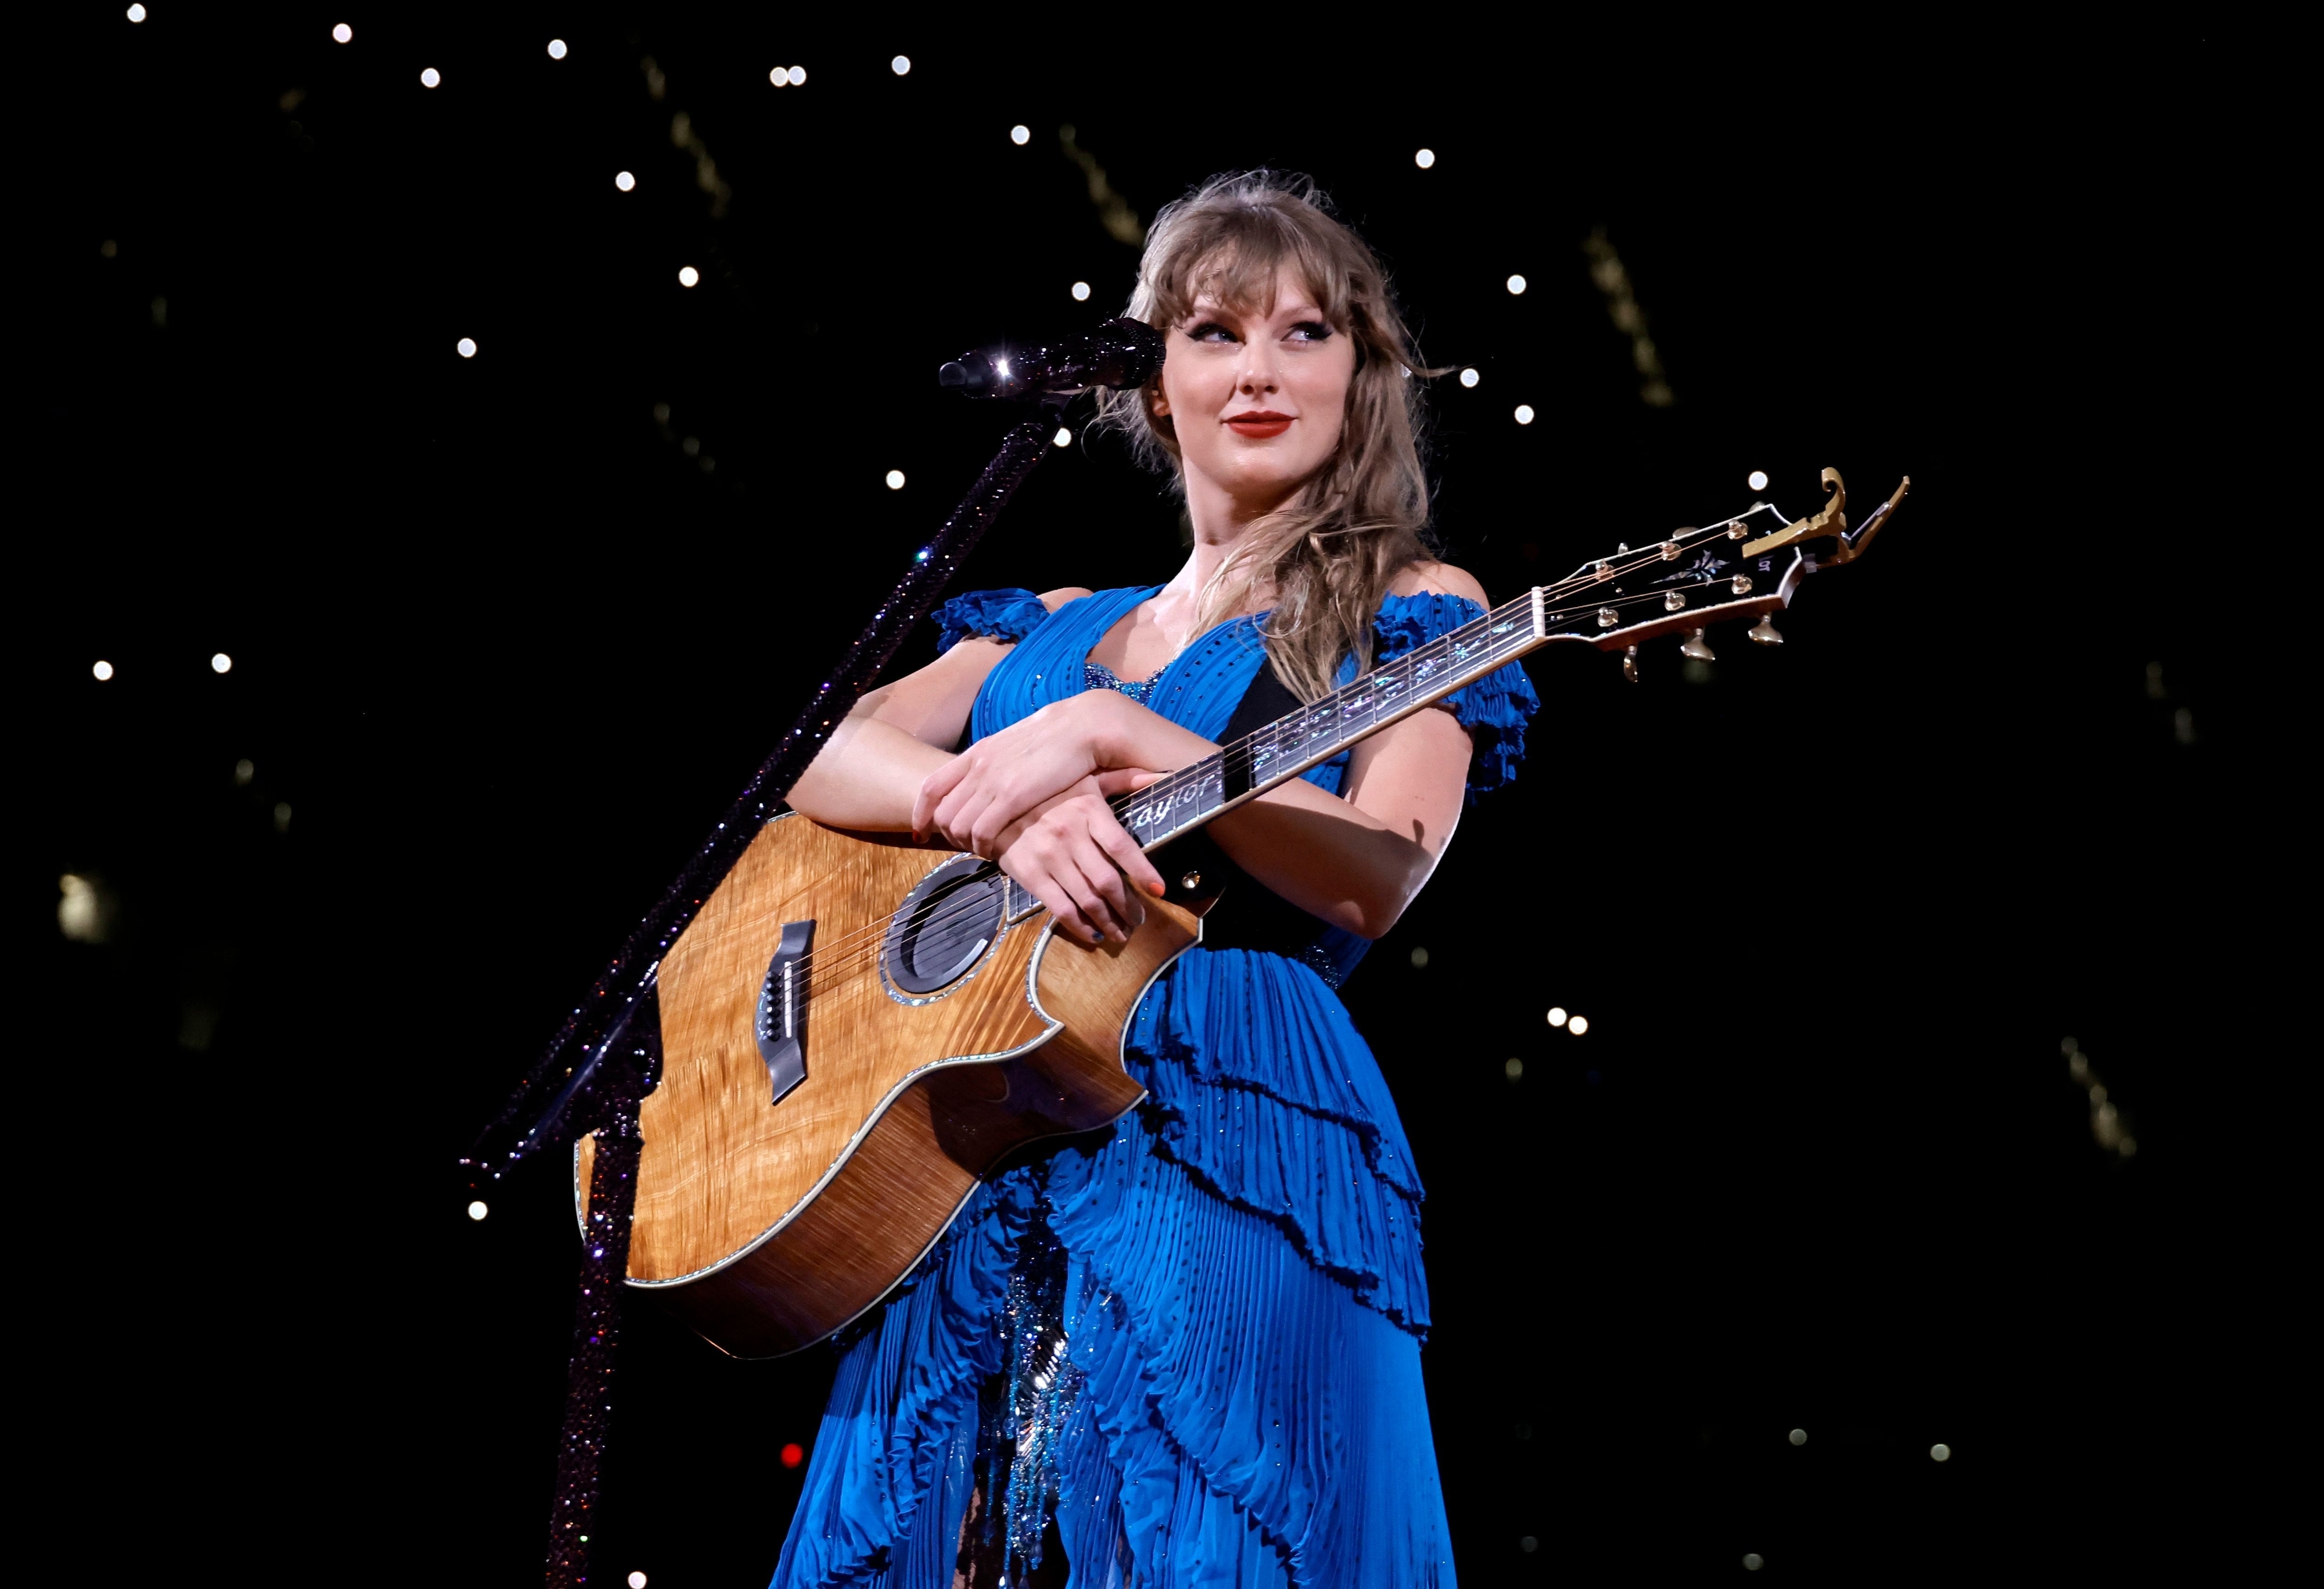 Taylor smiling onstage with a guitar